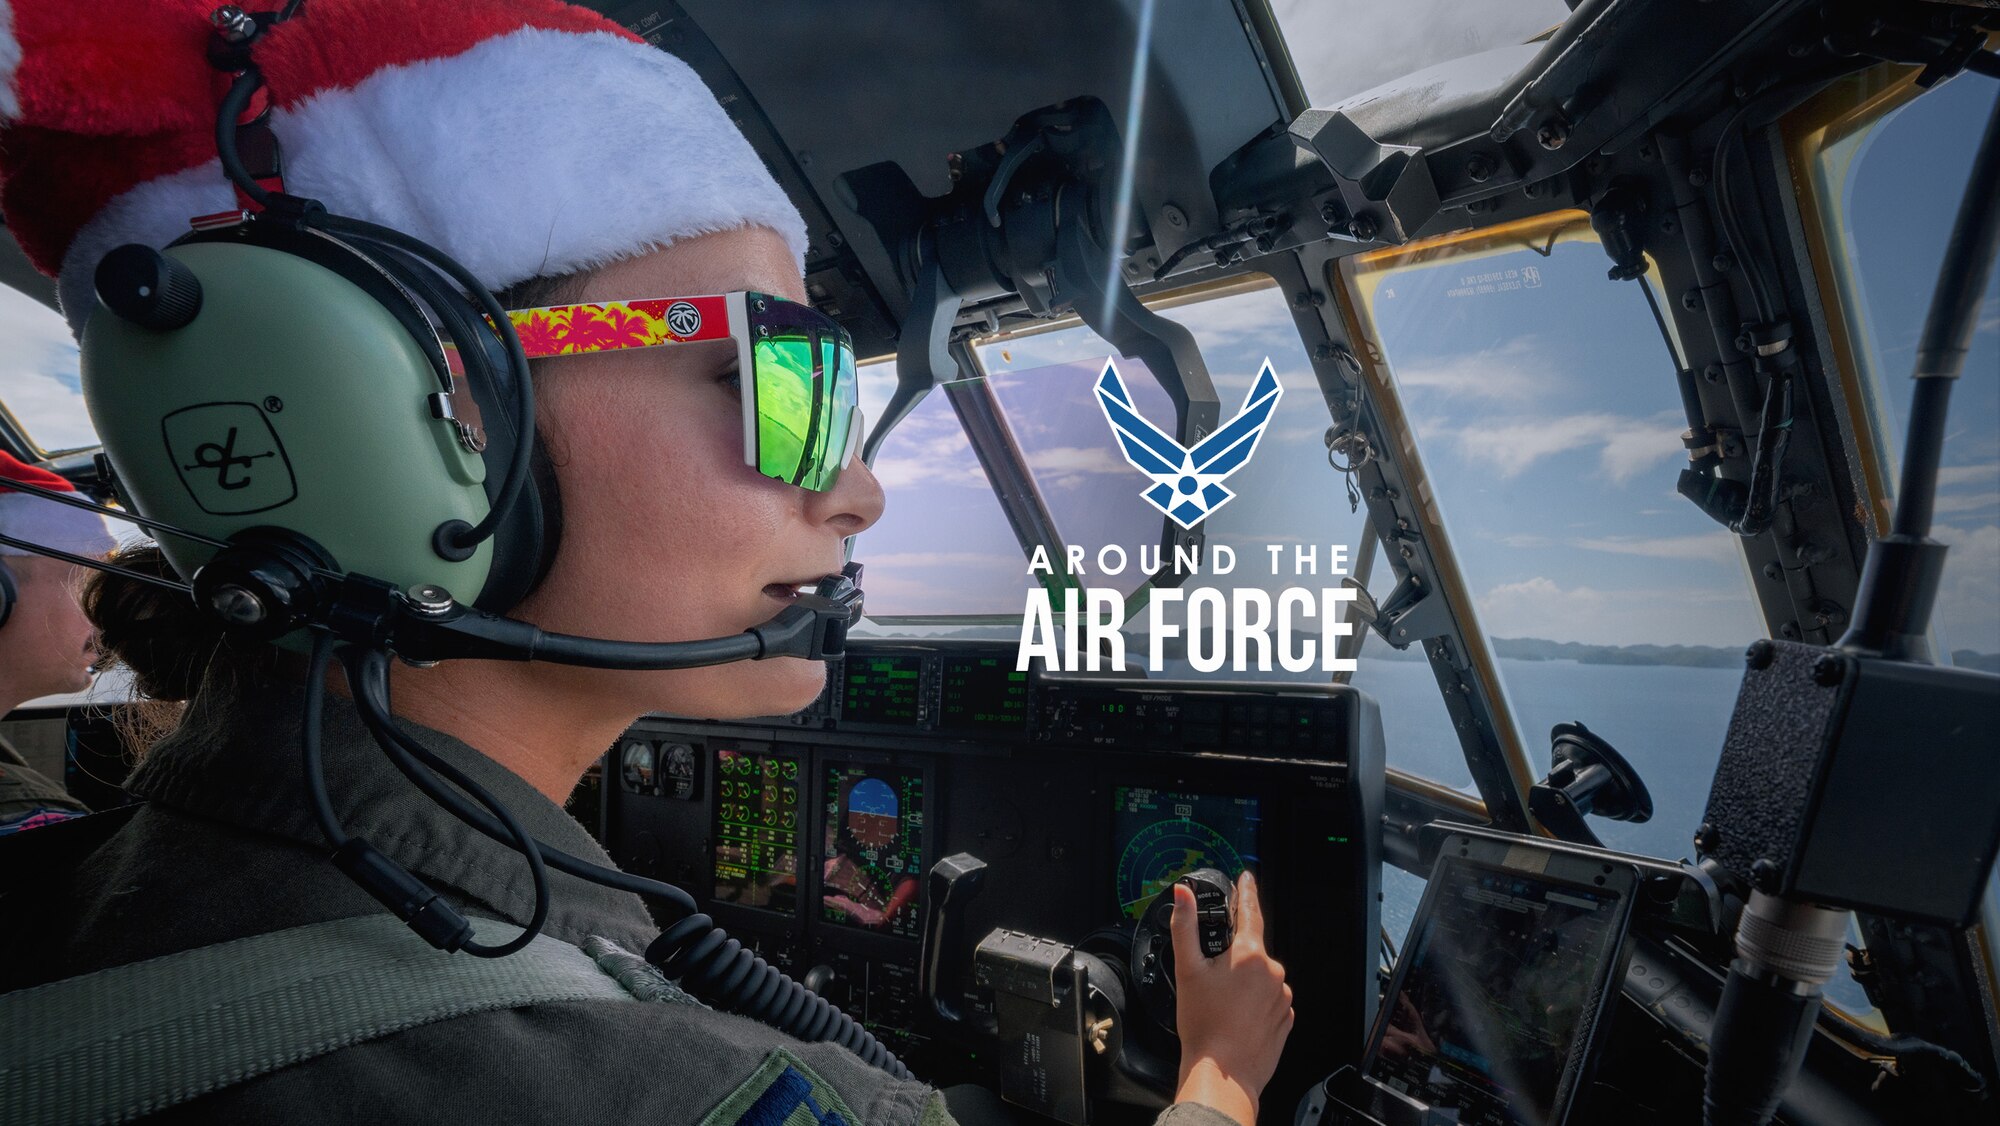 This week’s look around the Air Force highlights Operation Christmas Drop 2023, a humanitarian event that brings the U.S. and partner nations together to deliver essentials to remote islands in the Indo-Pacific region.